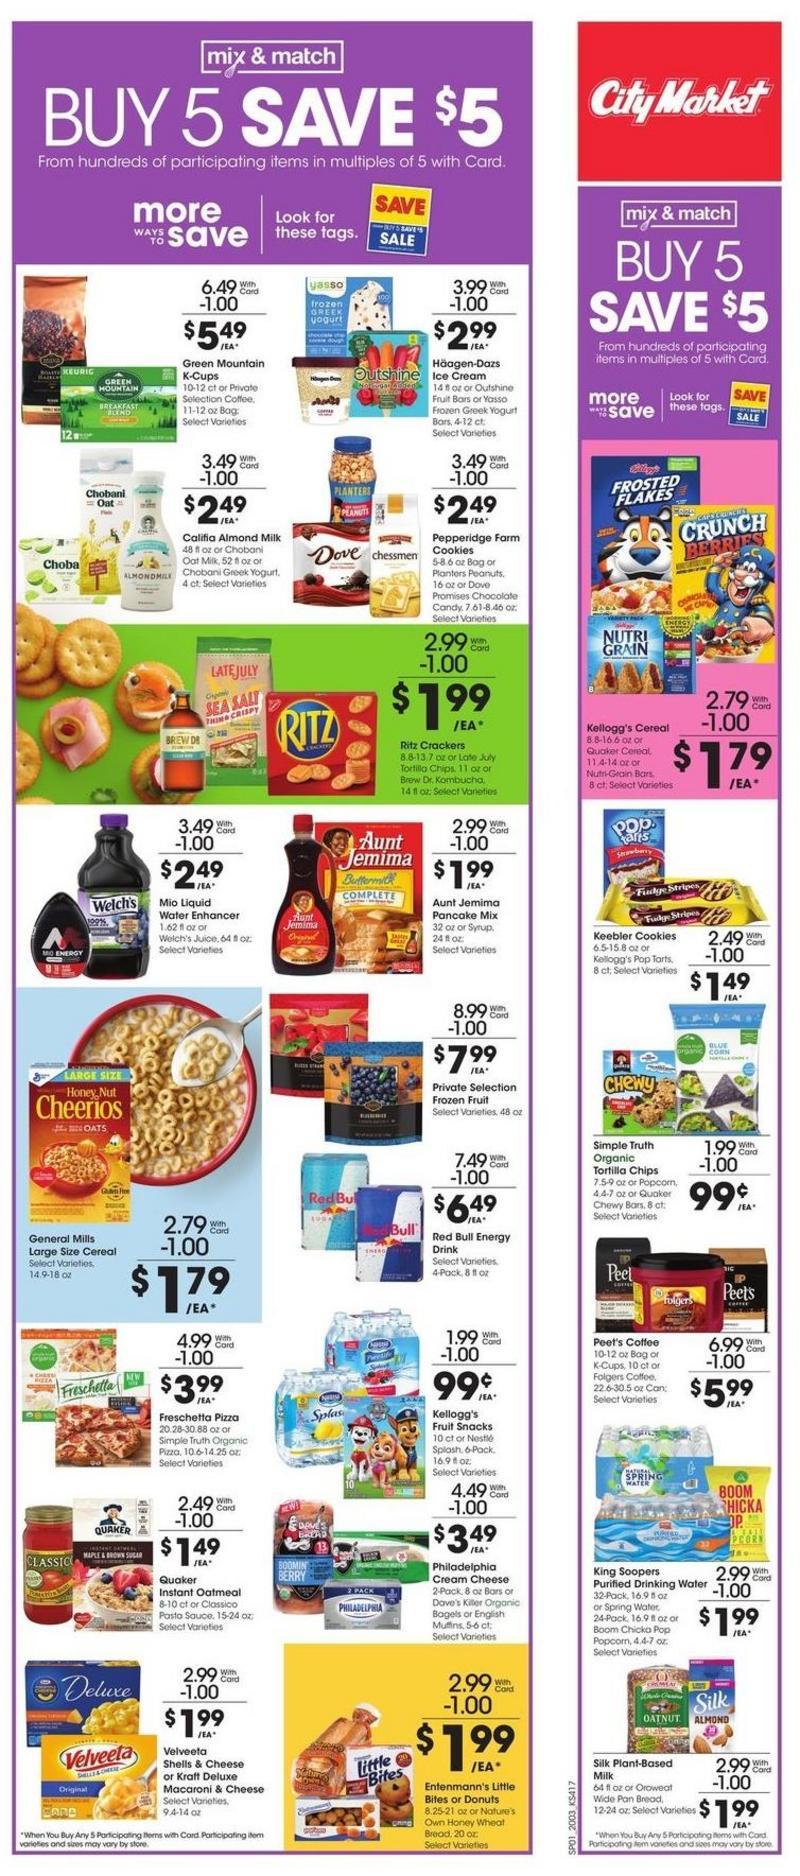 City Market Weekly Ad from February 19